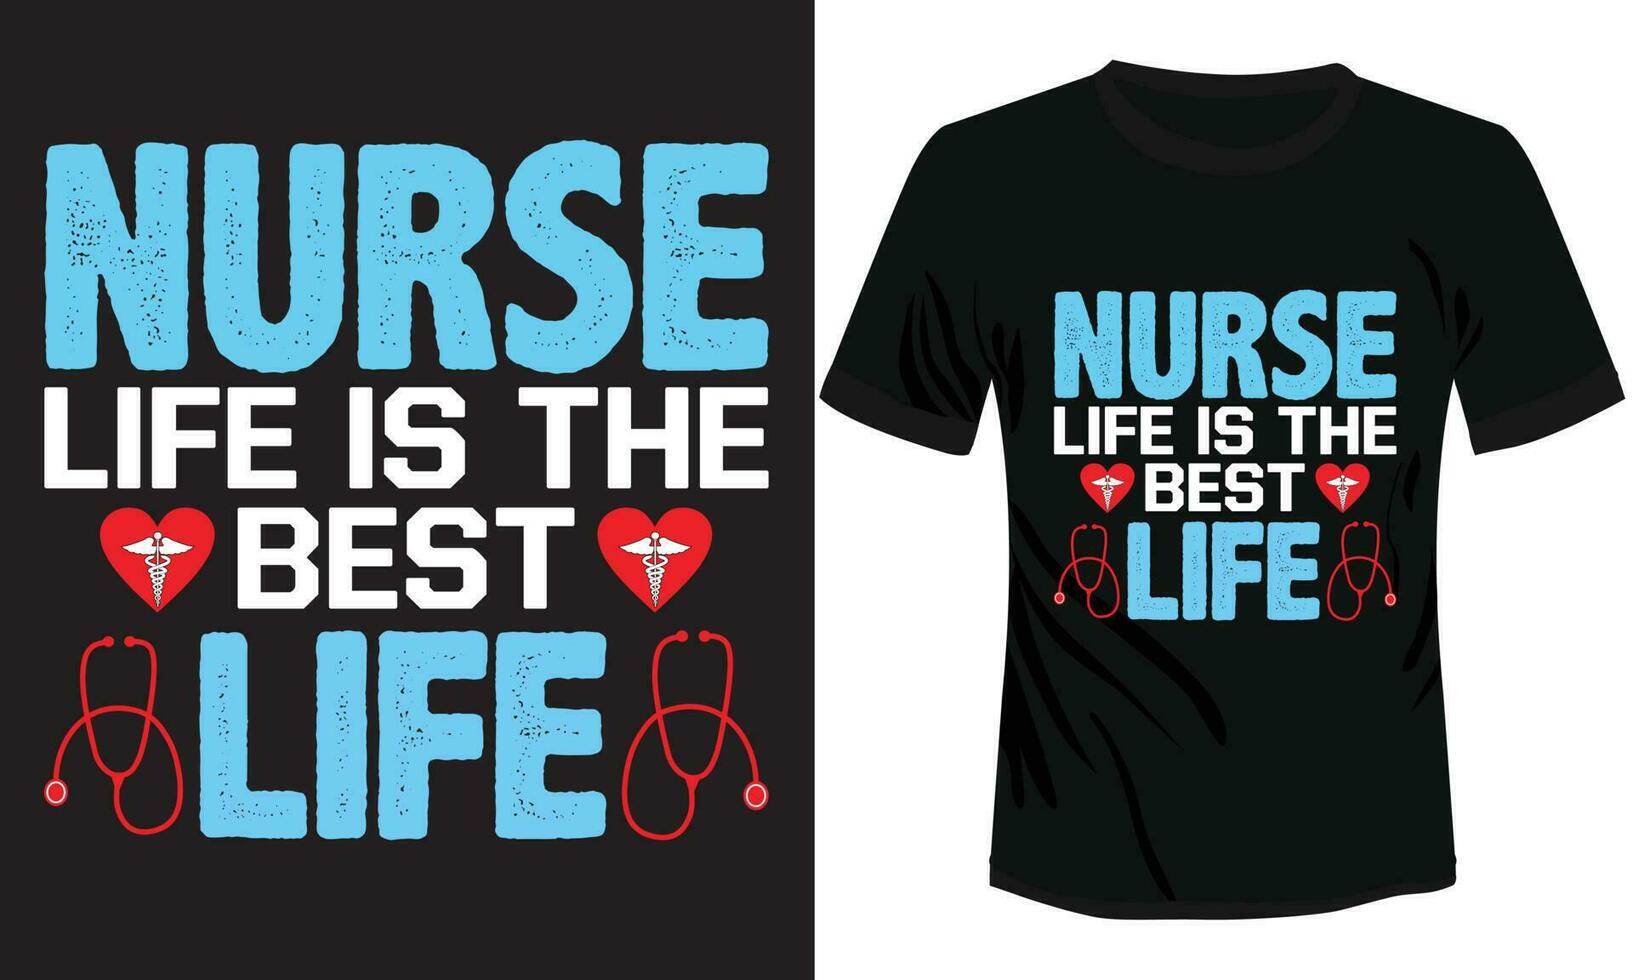 Nurse Life is the Best life Typography t-shirt Design vector